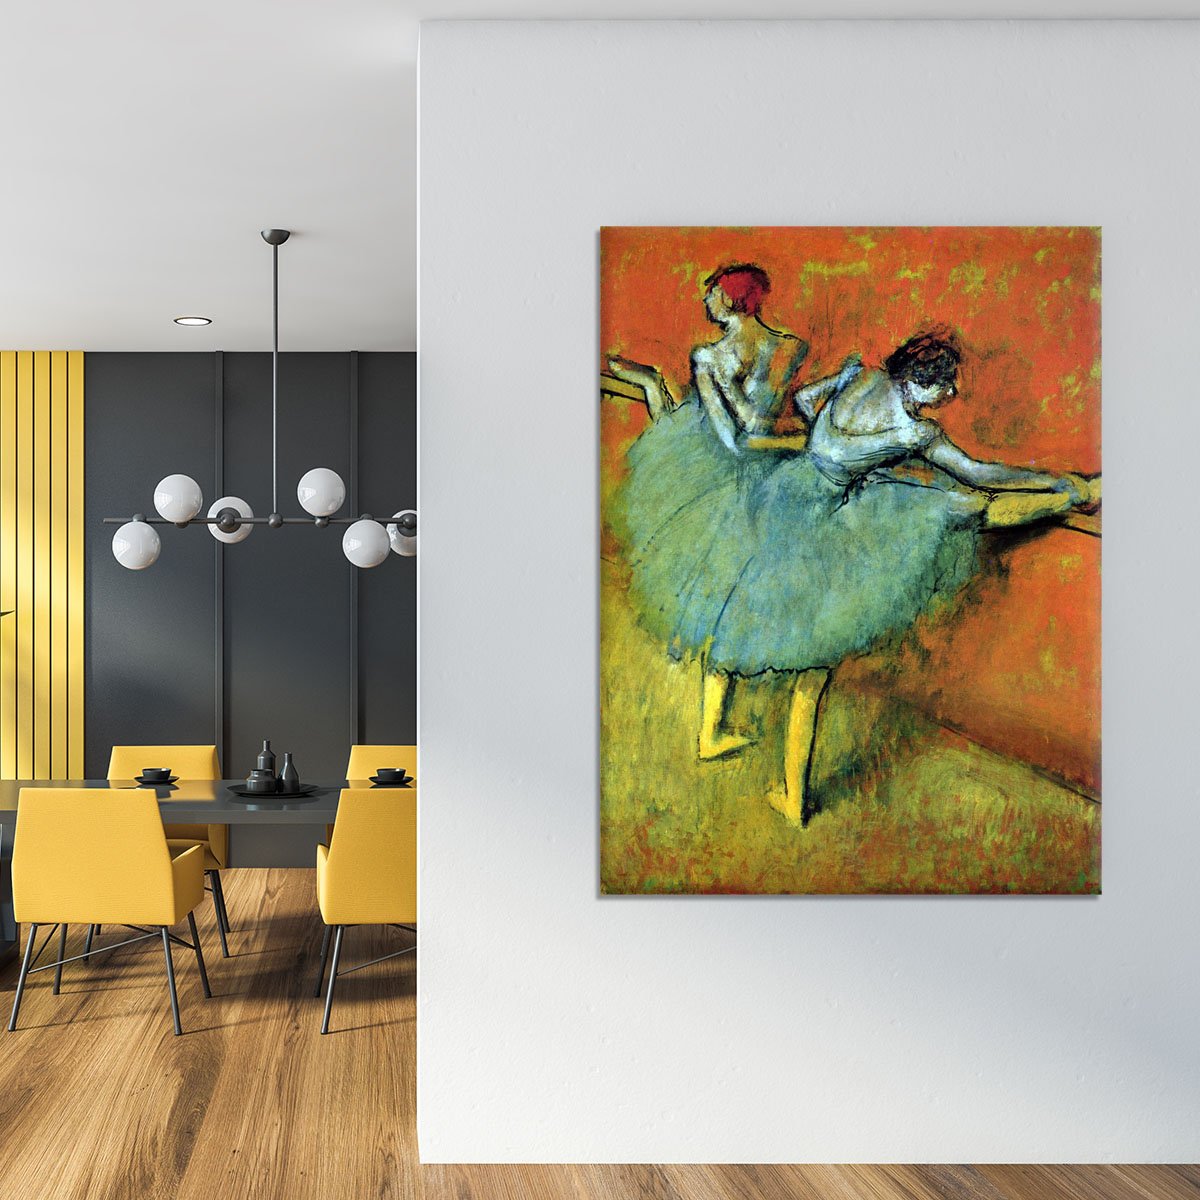 Dancers at the bar 1 by Degas Canvas Print or Poster